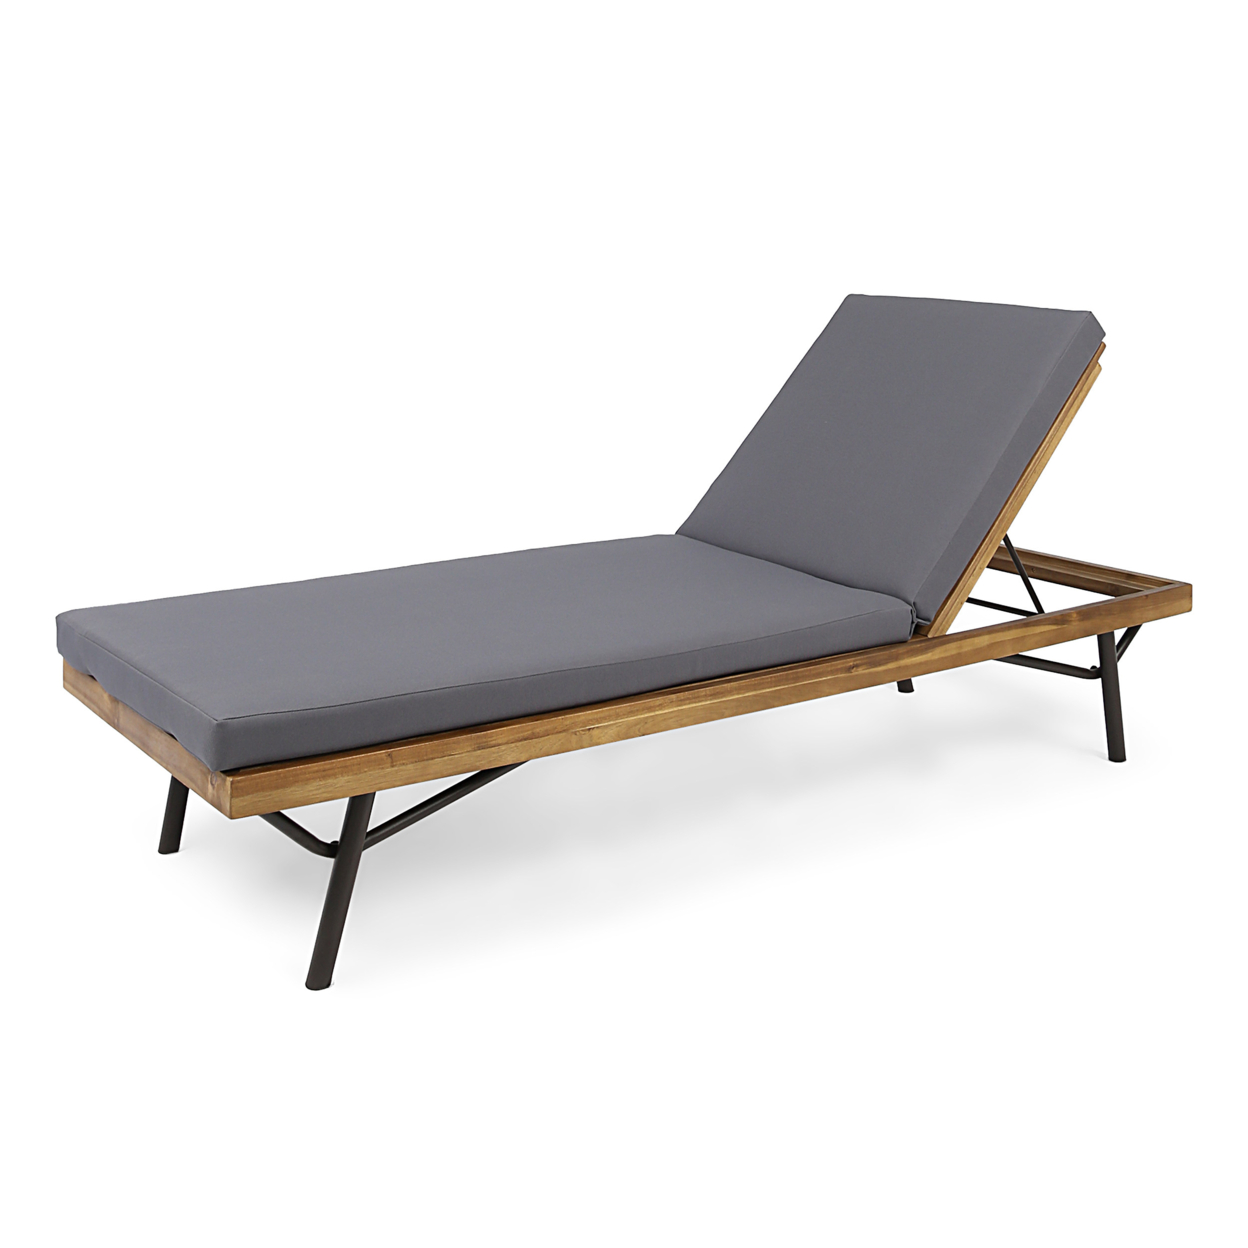 Lilith Outdoor Acacia And Eucalyptus Chaise Lounge, Teak Finish And Dark Gray